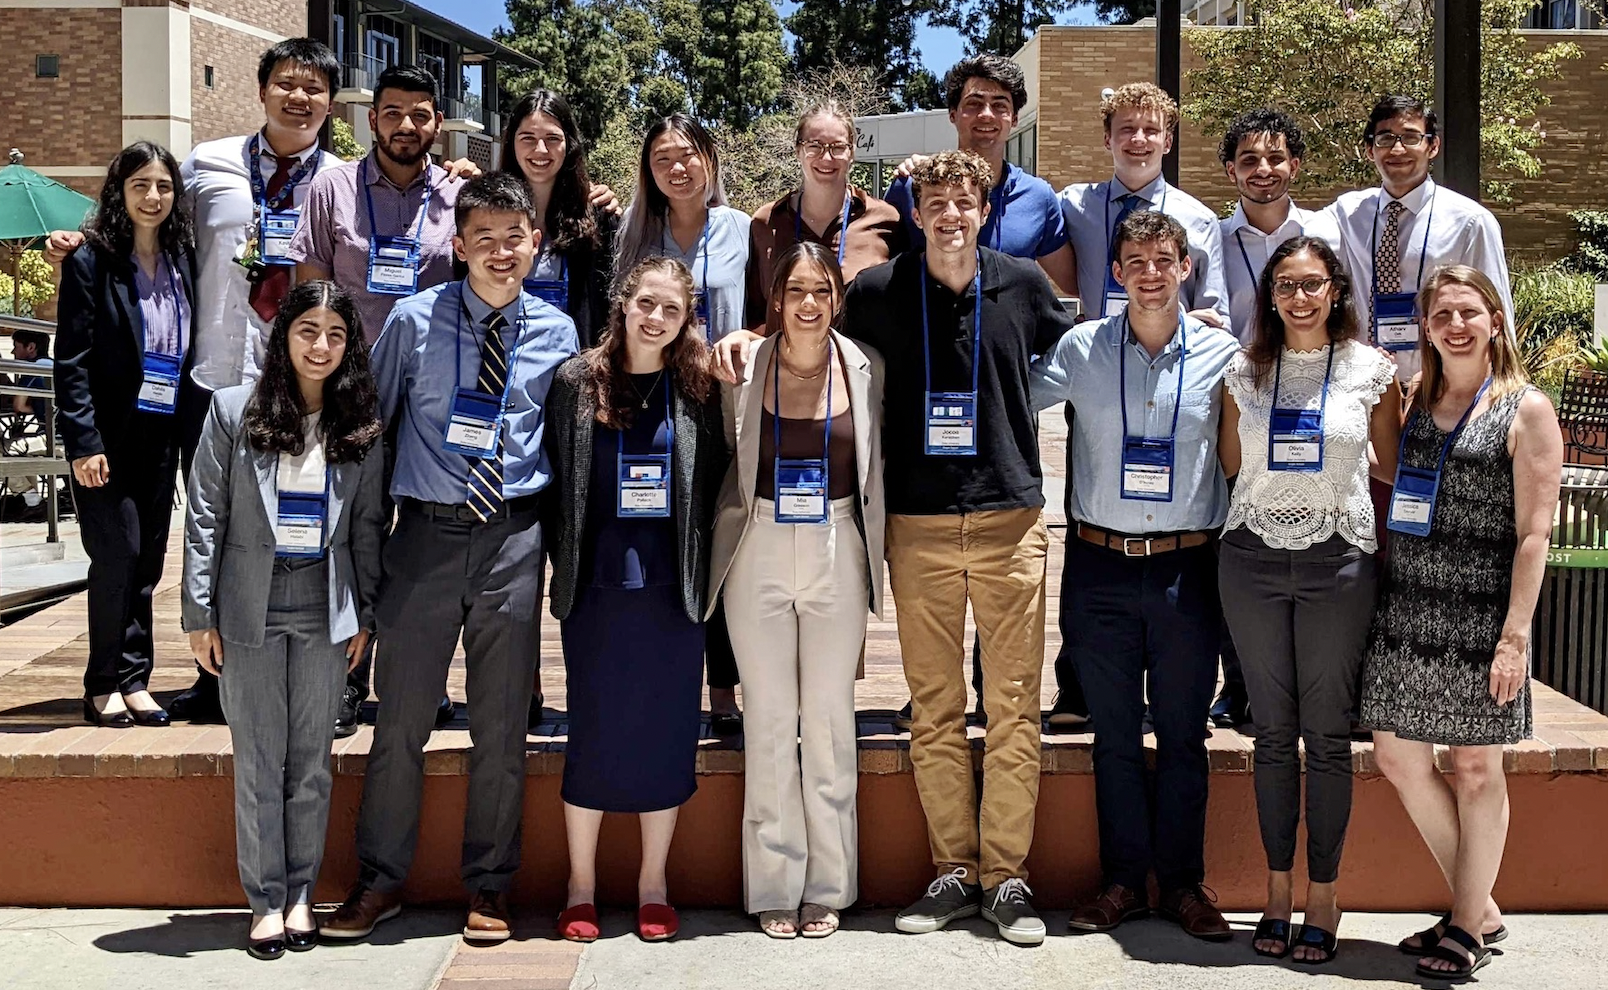 Madison with the other program members at the UCLA Amgen Symposium.